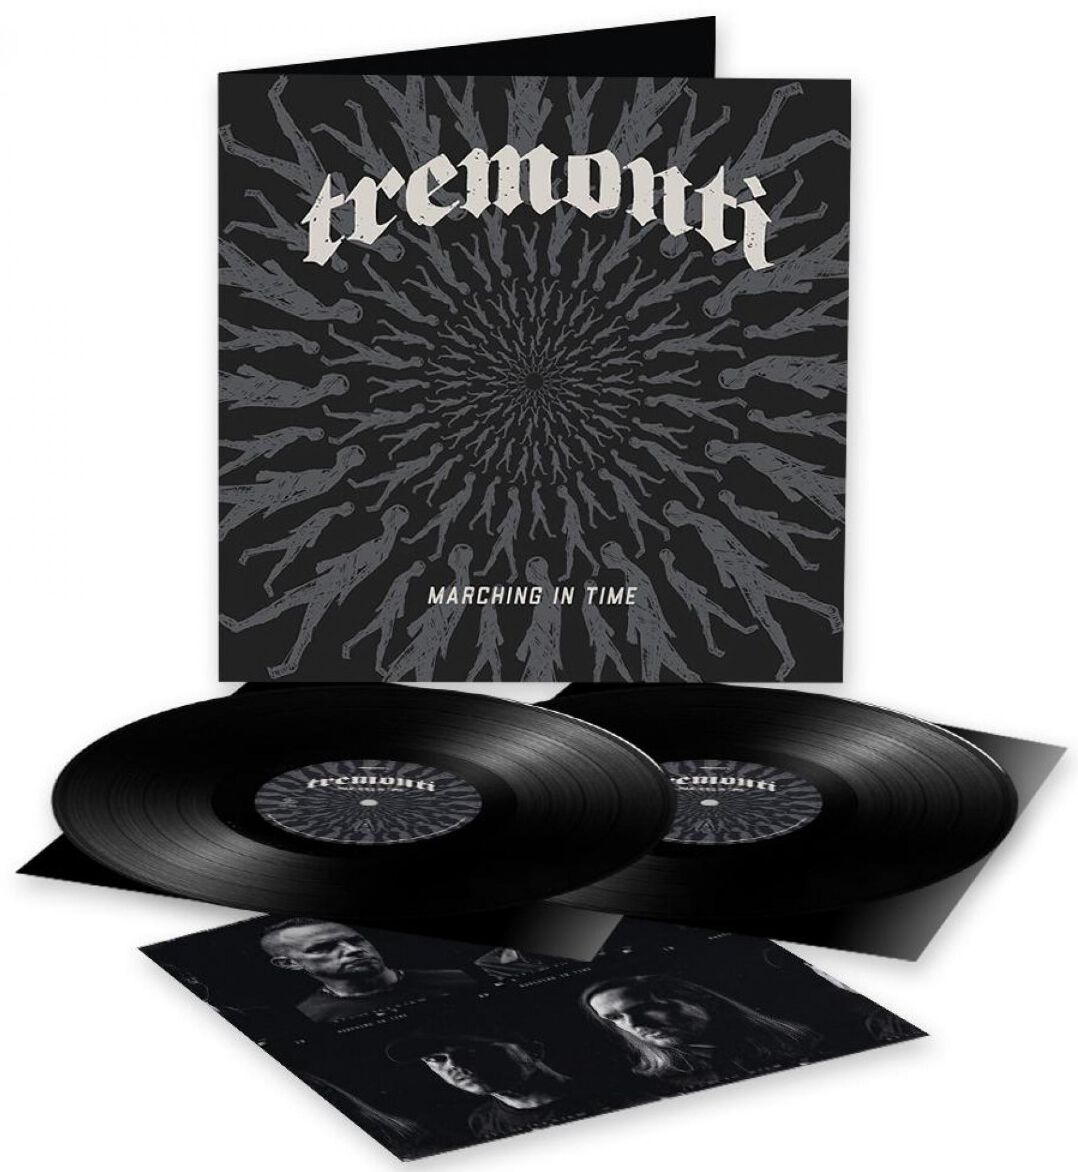 Image of Tremonti Marching in time 2-LP schwarz